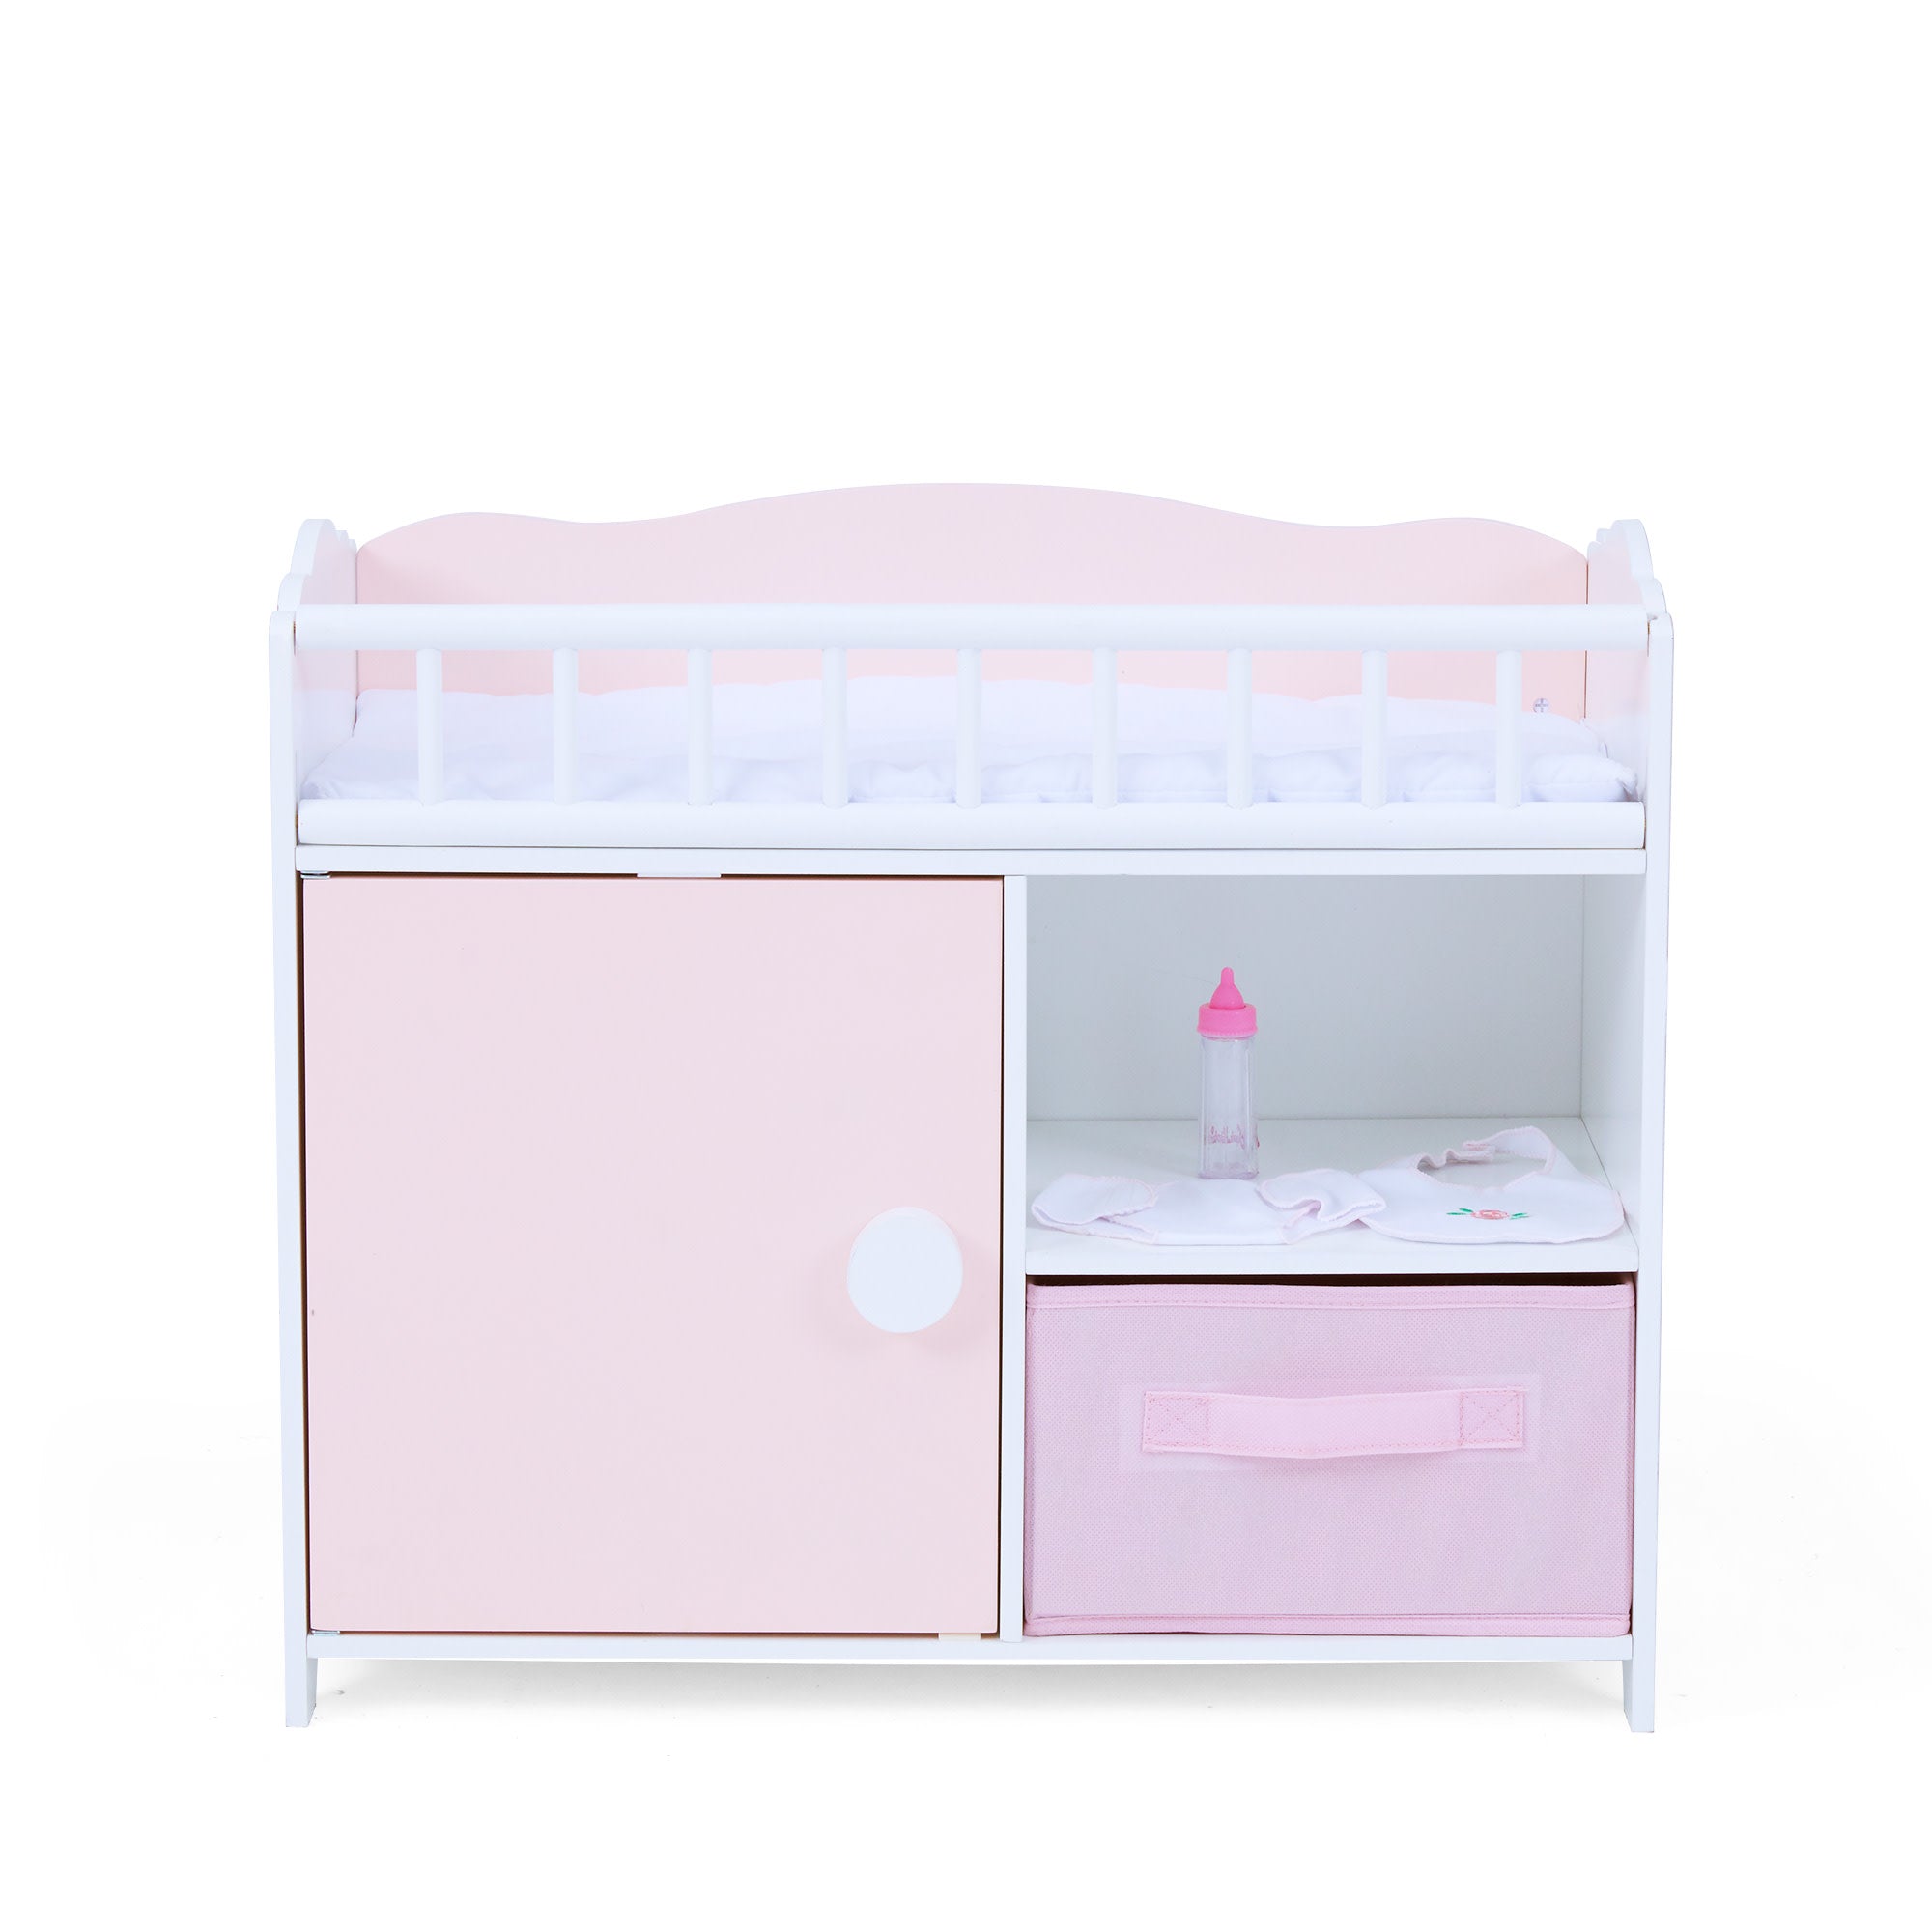 Teamson Kids - Aurora Princess Pink Plaid Baby Doll Bed with Accessories - Pink